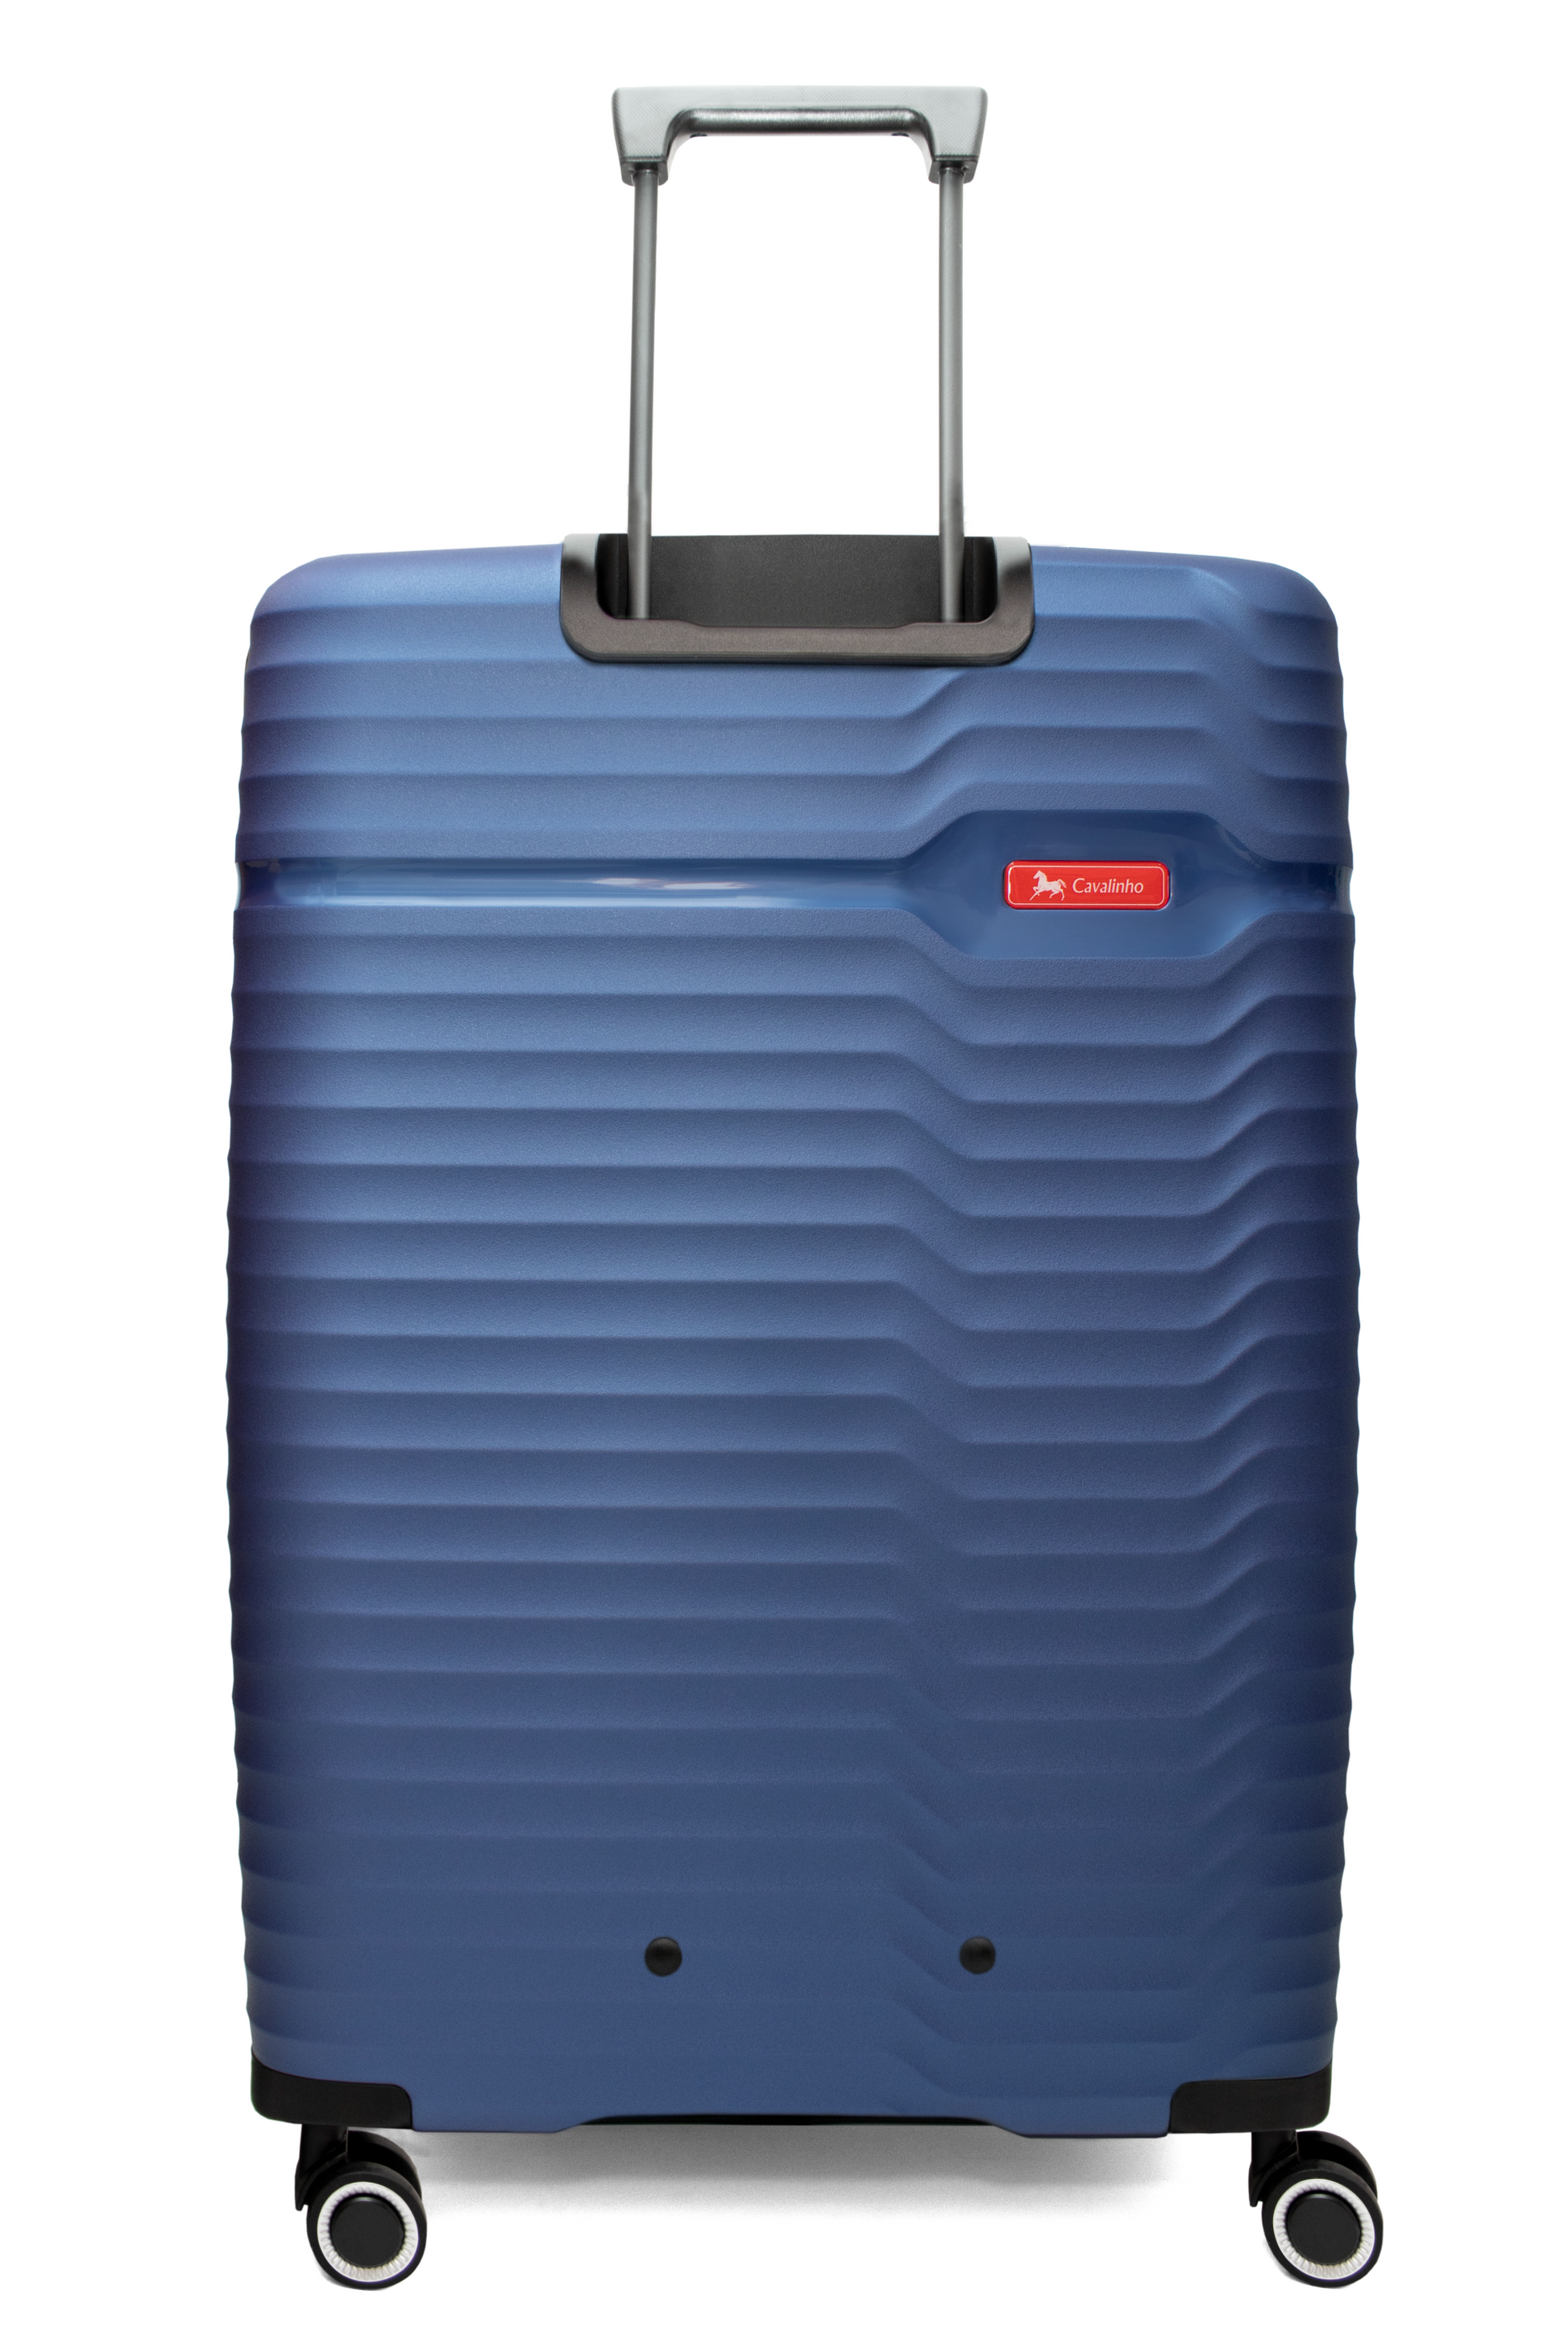 Cavalinho Check-in Hardside Luggage (24" or 28") - 28 inch SteelBlue - 68010003.03.28_3